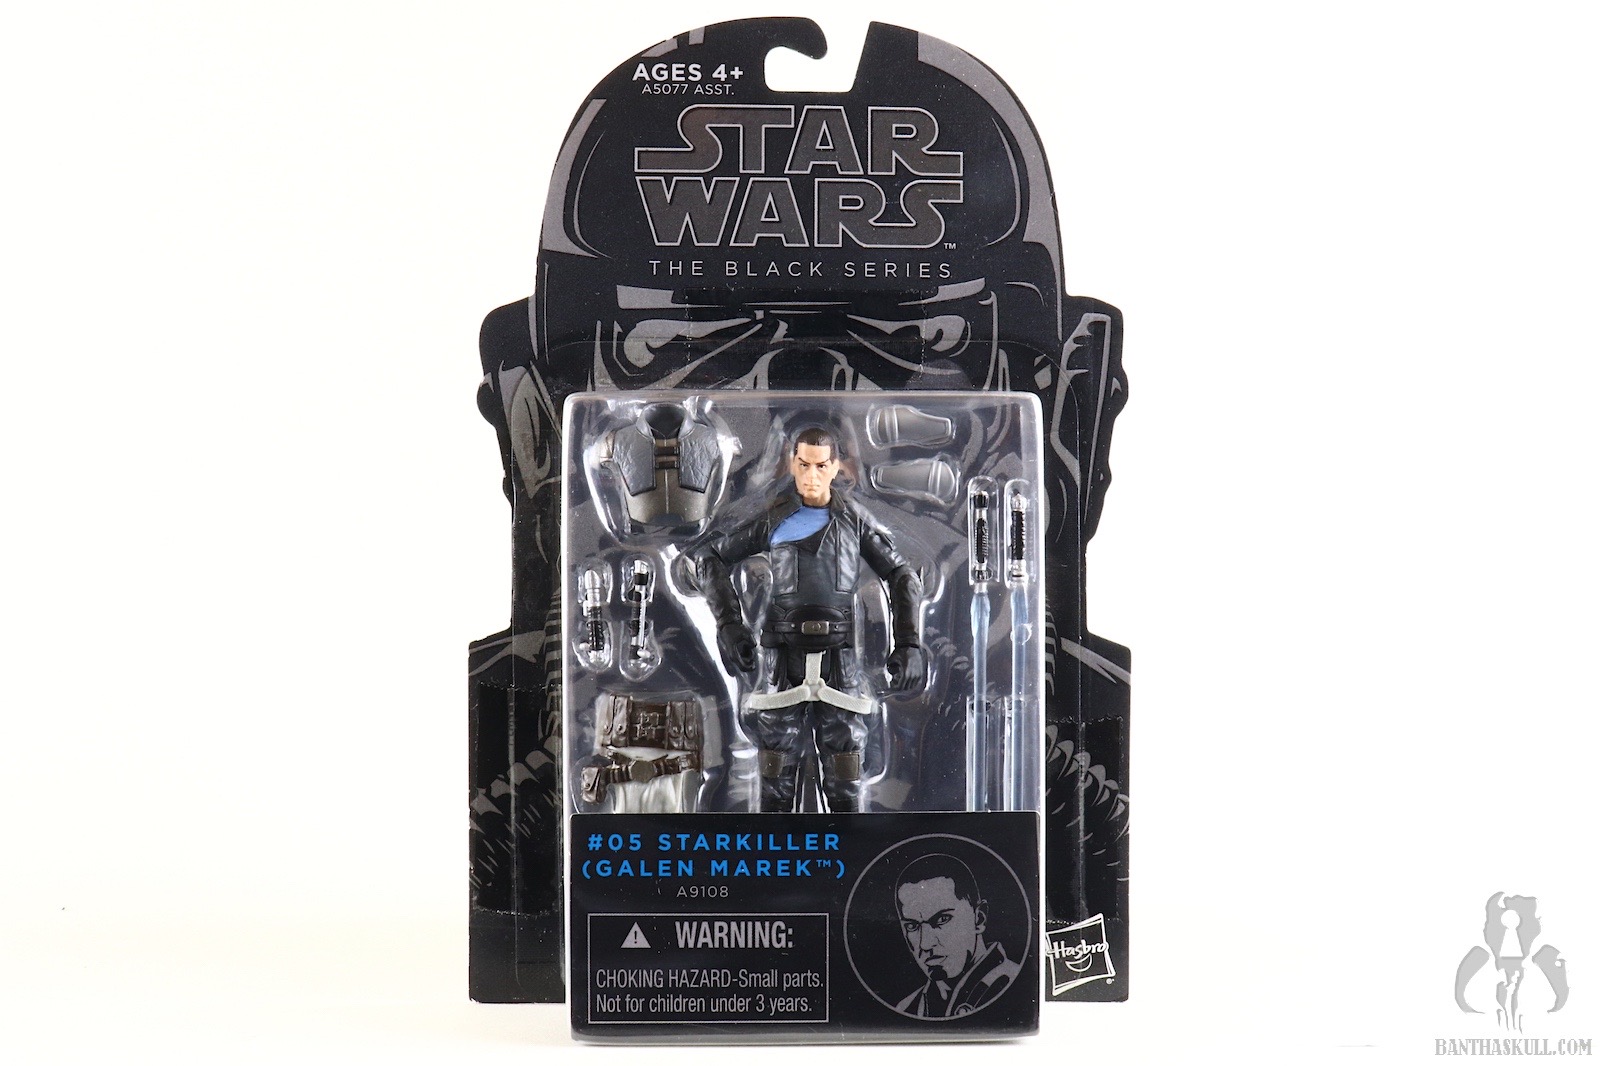 REVIEW AND PHOTO GALLERY: Star Wars The Black Series TBS2 #05